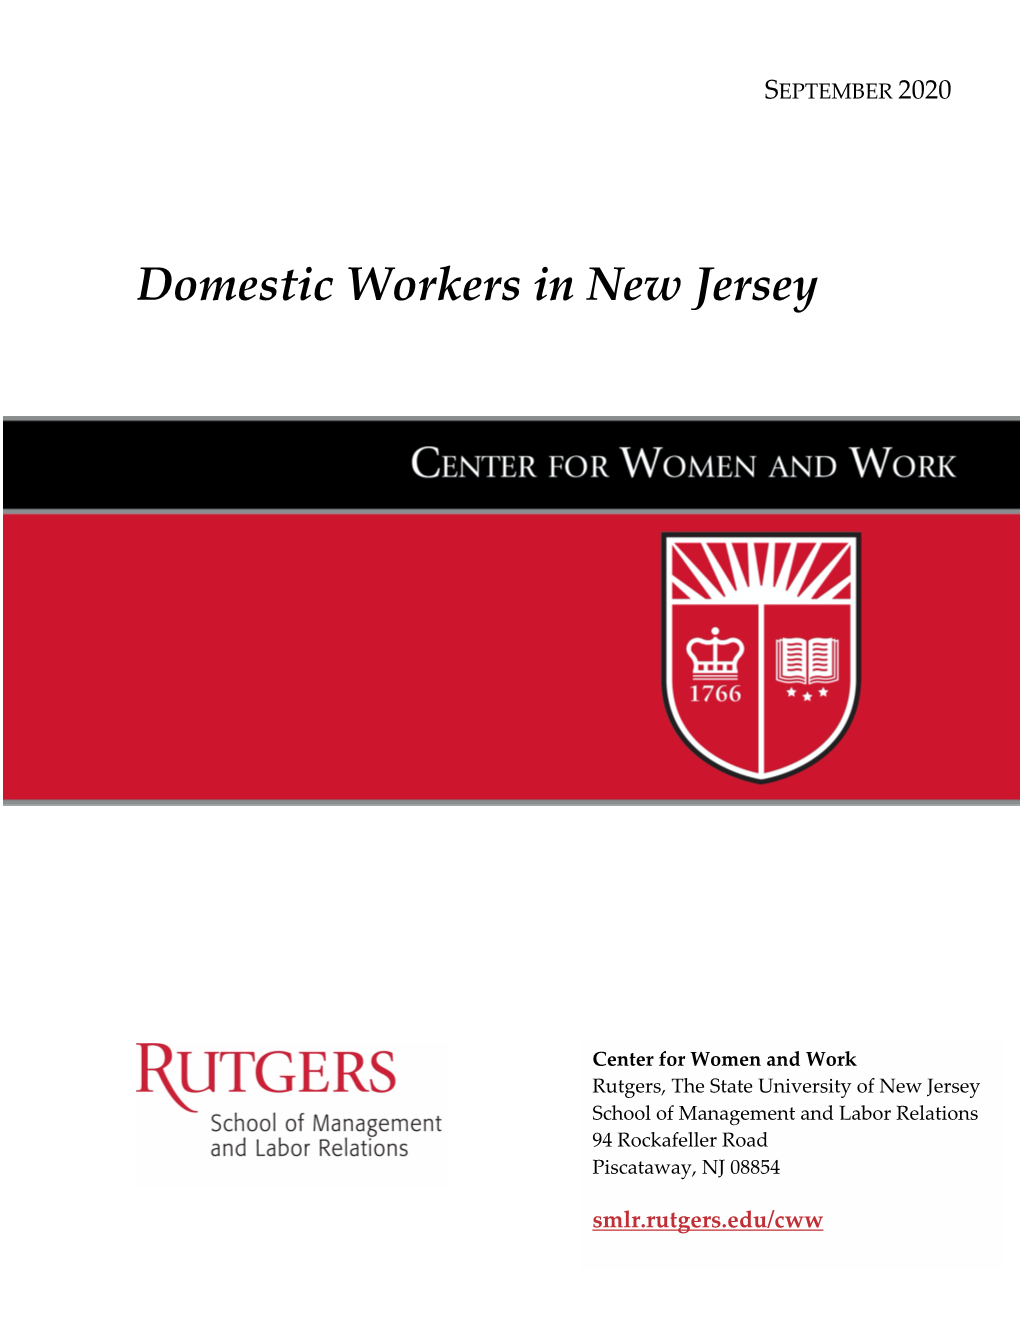 Domestic Workers in New Jersey